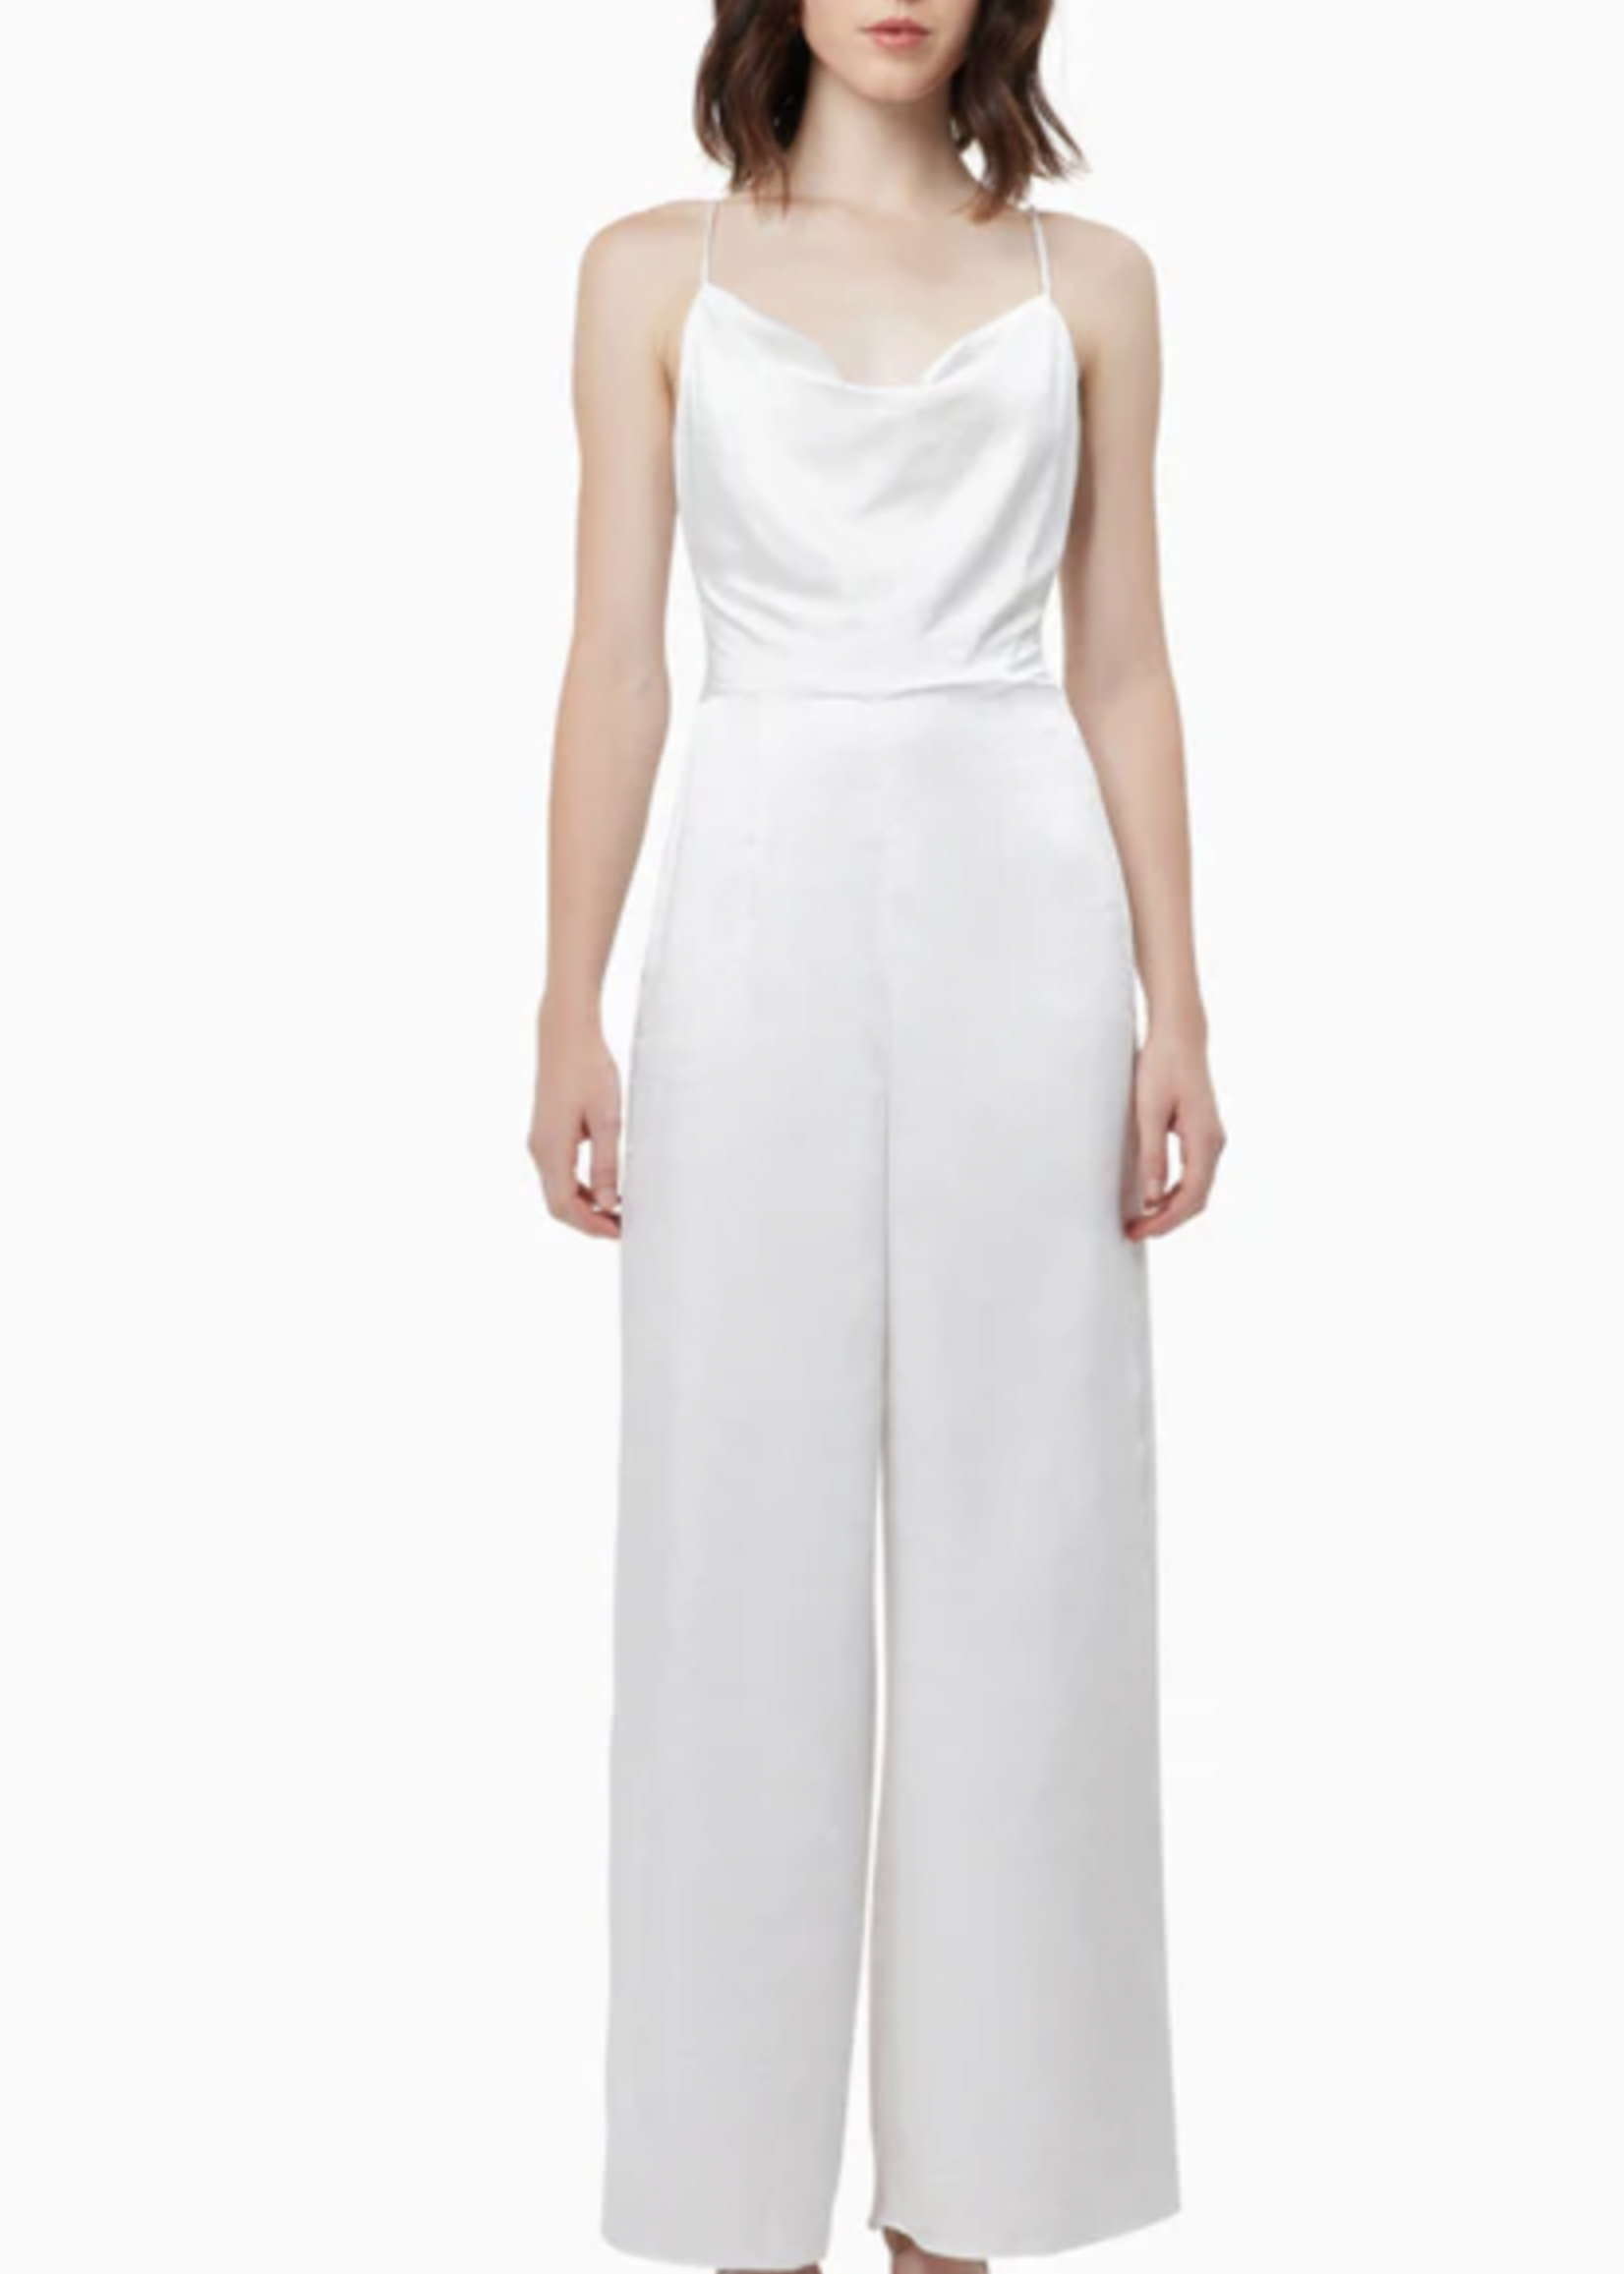 Elitaire Boutique Lydia Jumpsuit in Ivory